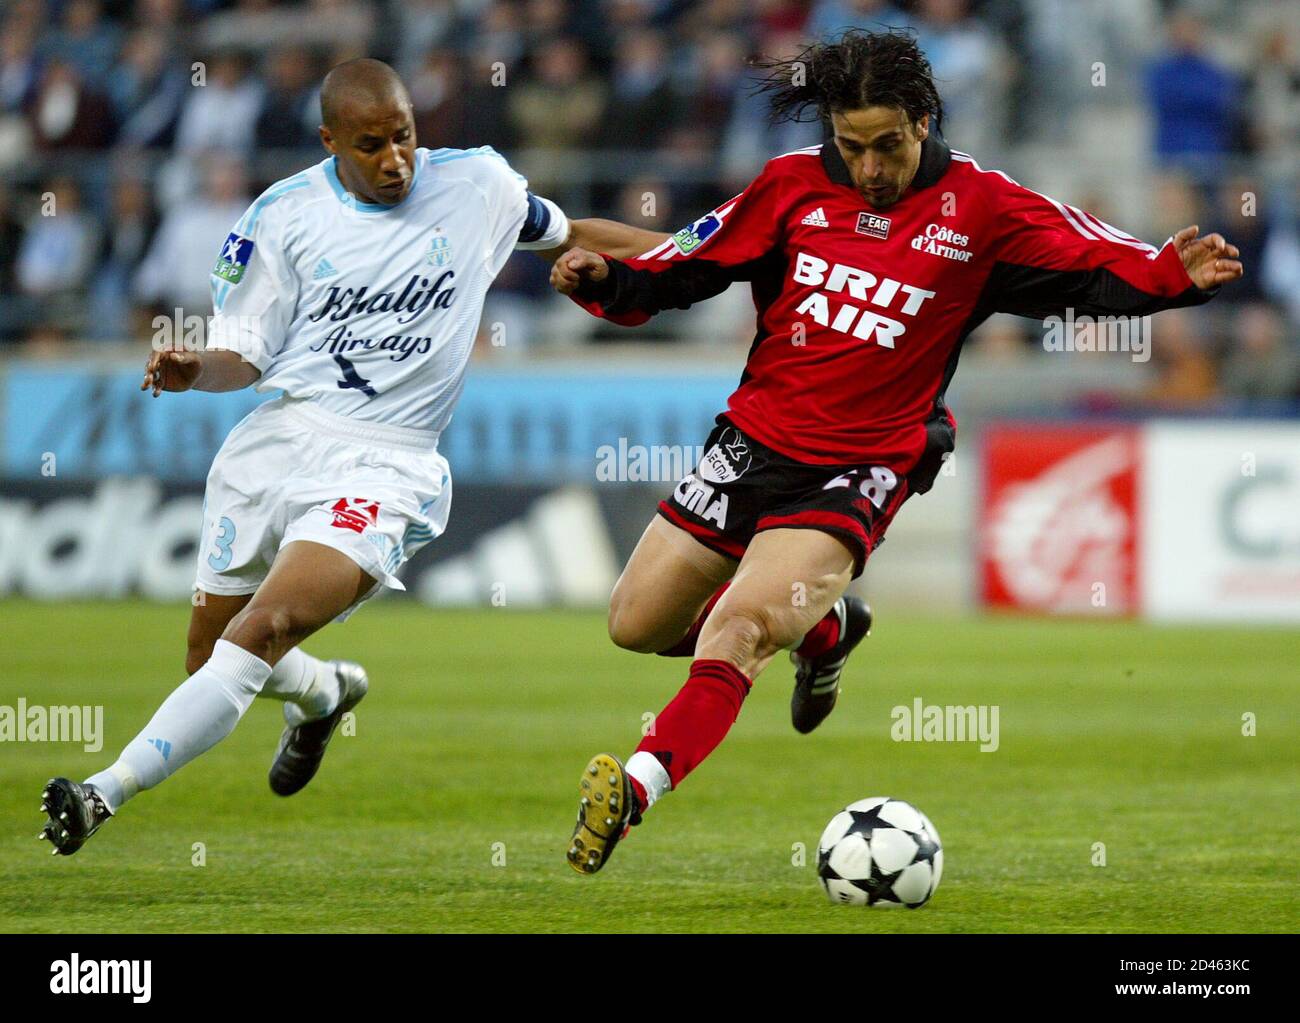 MANUEL DOS SANTOS OF MARSEILLE CHALLENGES JEAN LOUIS MONTERO OF GUINGAMP  DURING FRENCH SOCCER LEAGUE MATCH IN MARSEILLE Stock Photo - Alamy